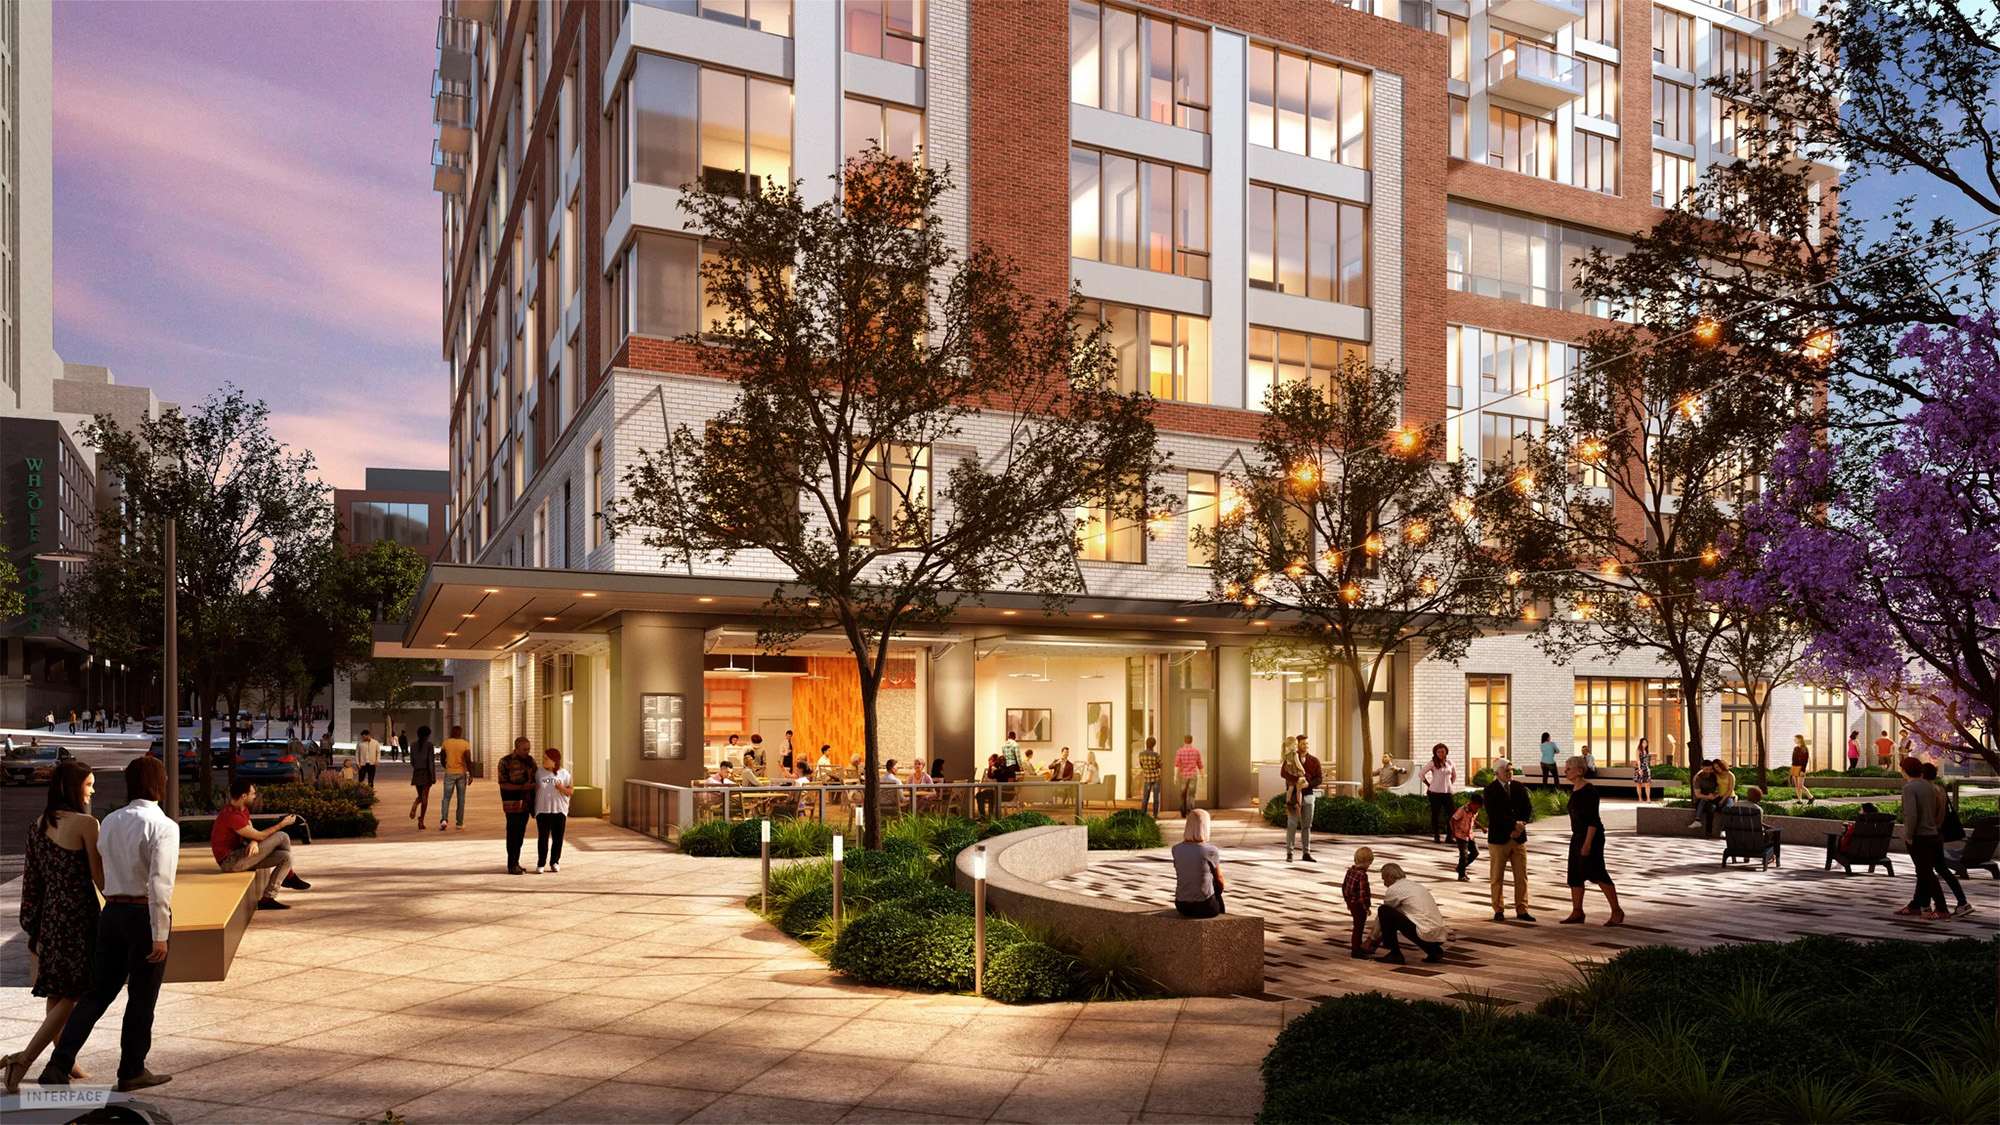 A street-level restaurant being planned for The Trillium at Tysons, a senior living residential tower in McLean, VA, brings the surrounding public inside, thus erasing the boundaries between the building’s residents and the neighborhood at large. 